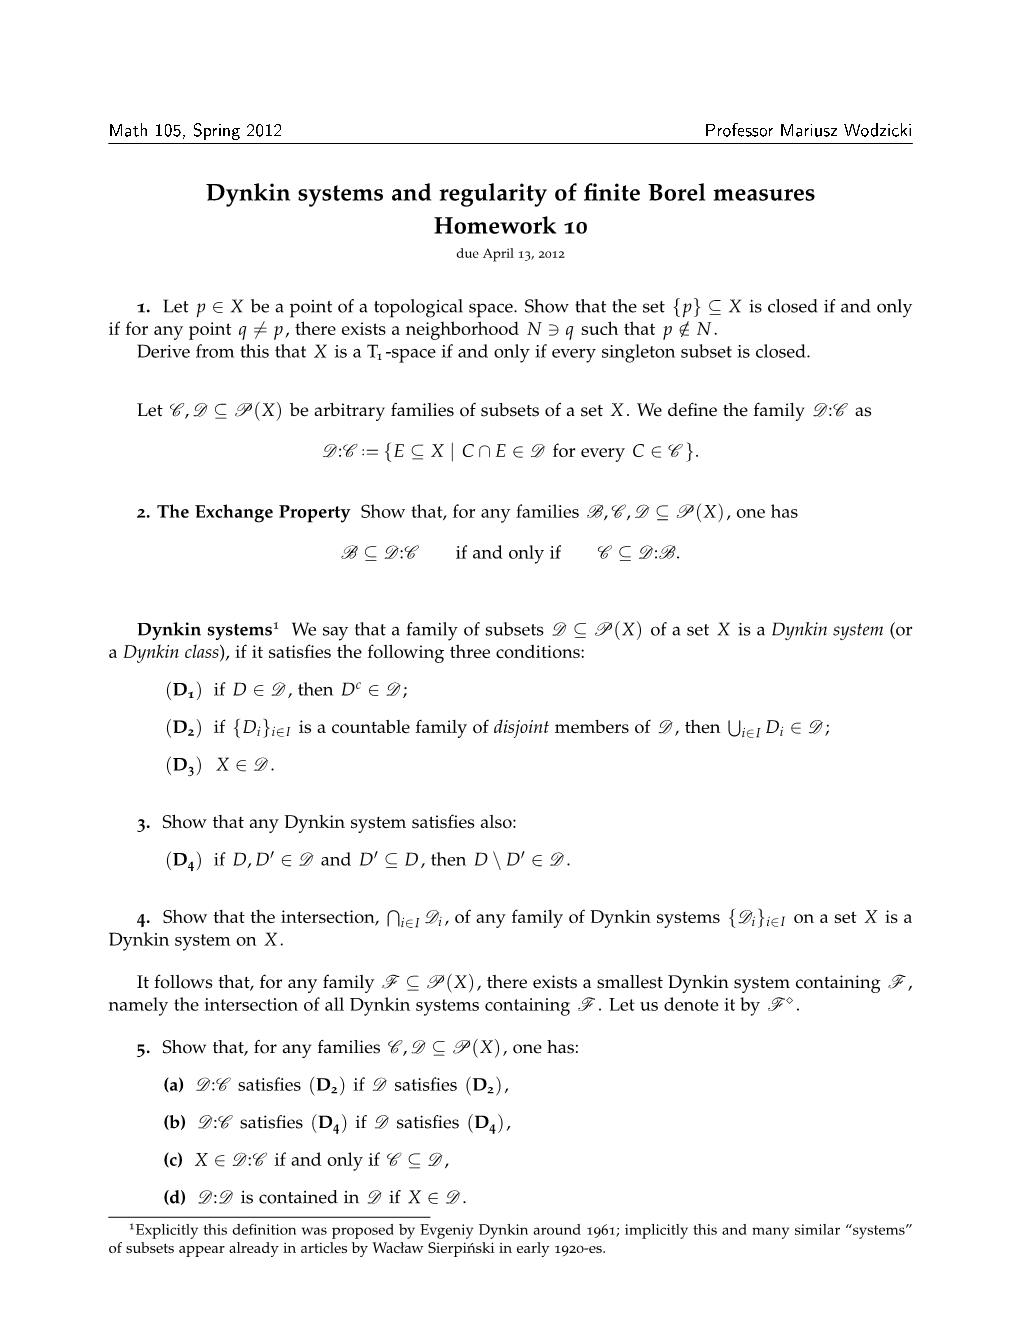 Dynkin Systems and Regularity of Finite Borel Measures Homework 10